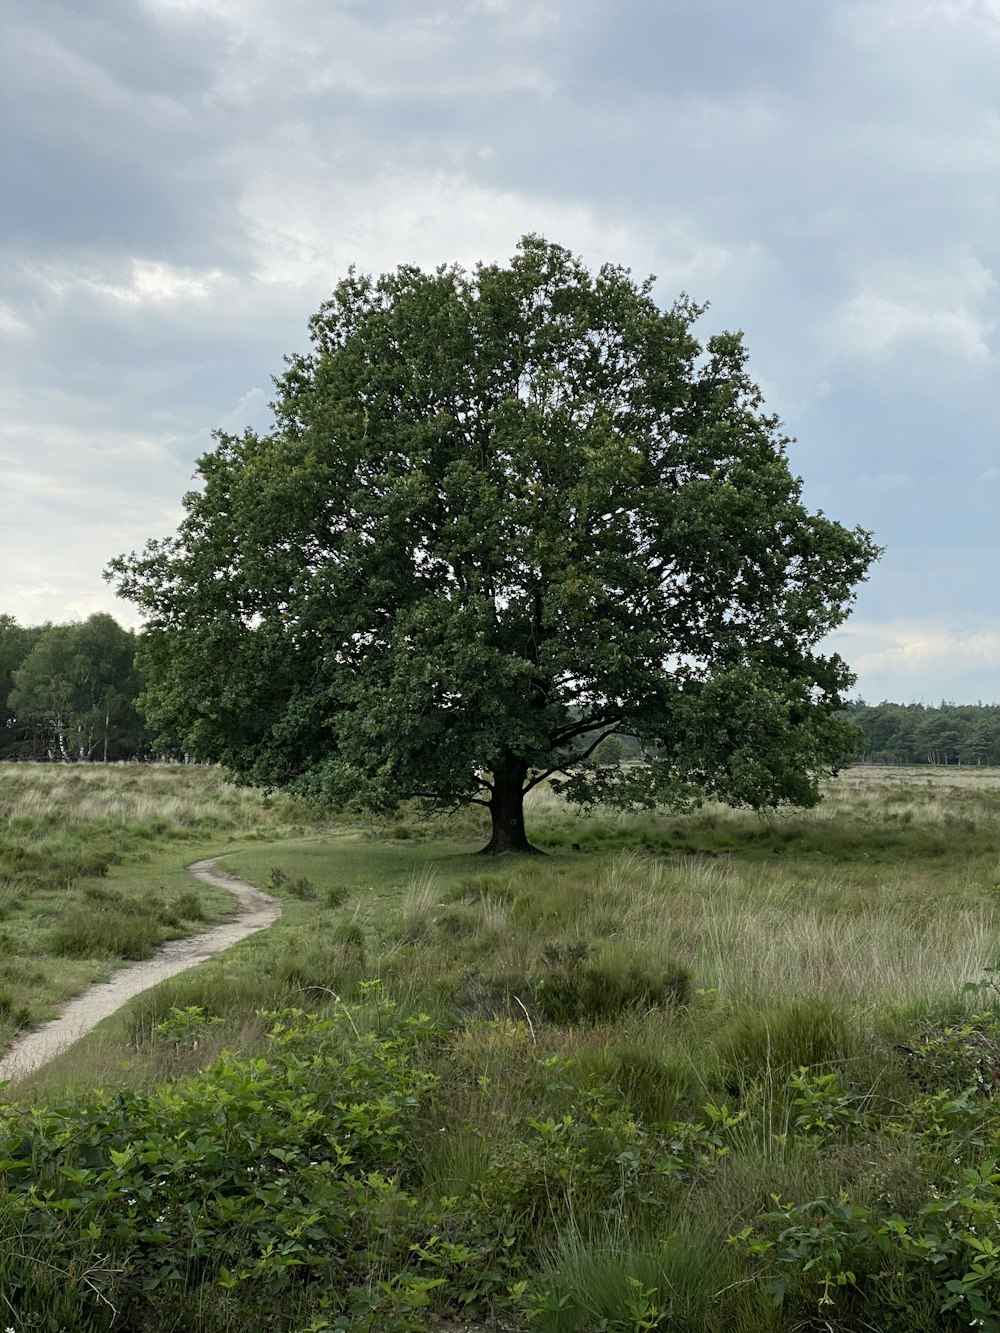 a tree in a field with a dirt path in the foreground